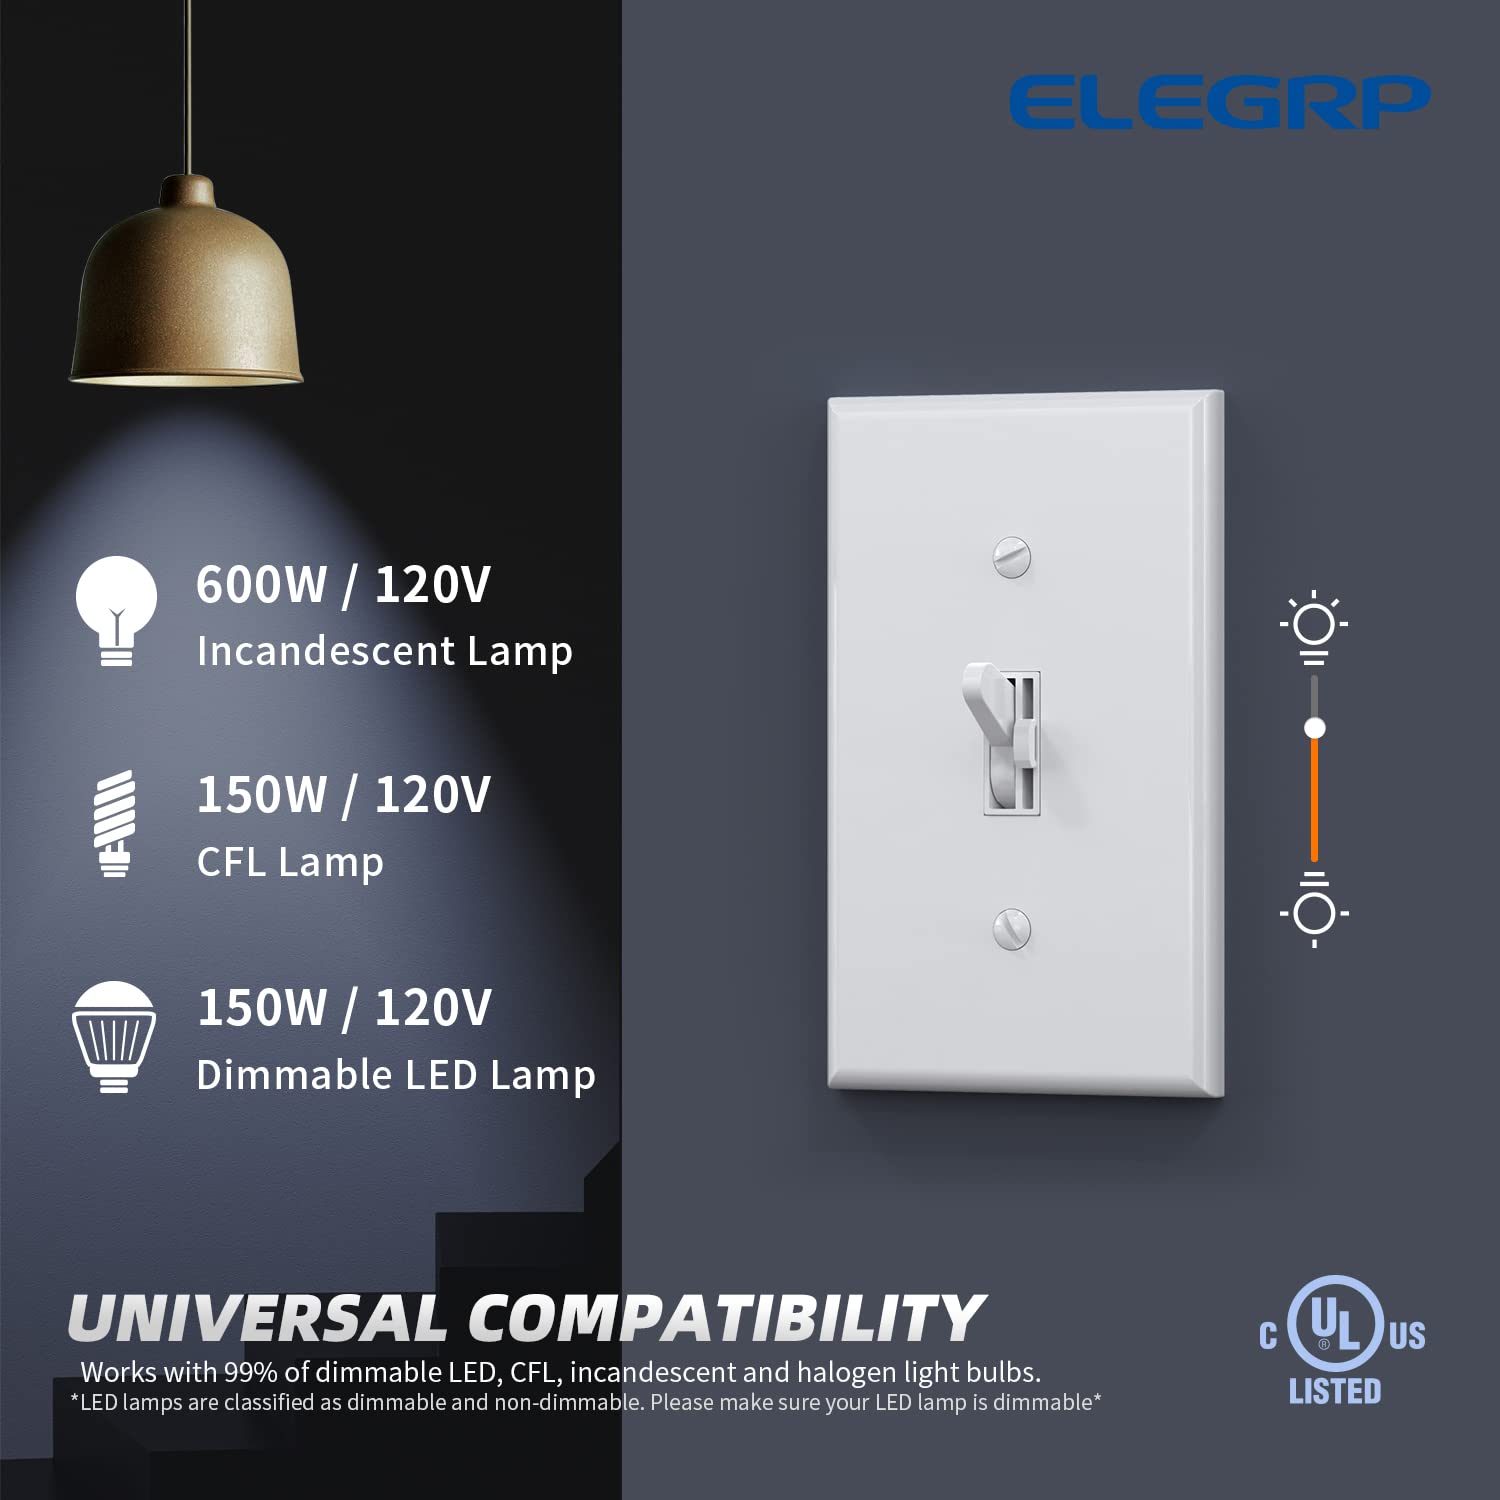 Generic ELEGRP Toggle Dimmer Switch for Dimmable LED, CFL and Incandescent Light Lamp Bulbs, Single Pole or 3-Way, Full Control with Pr